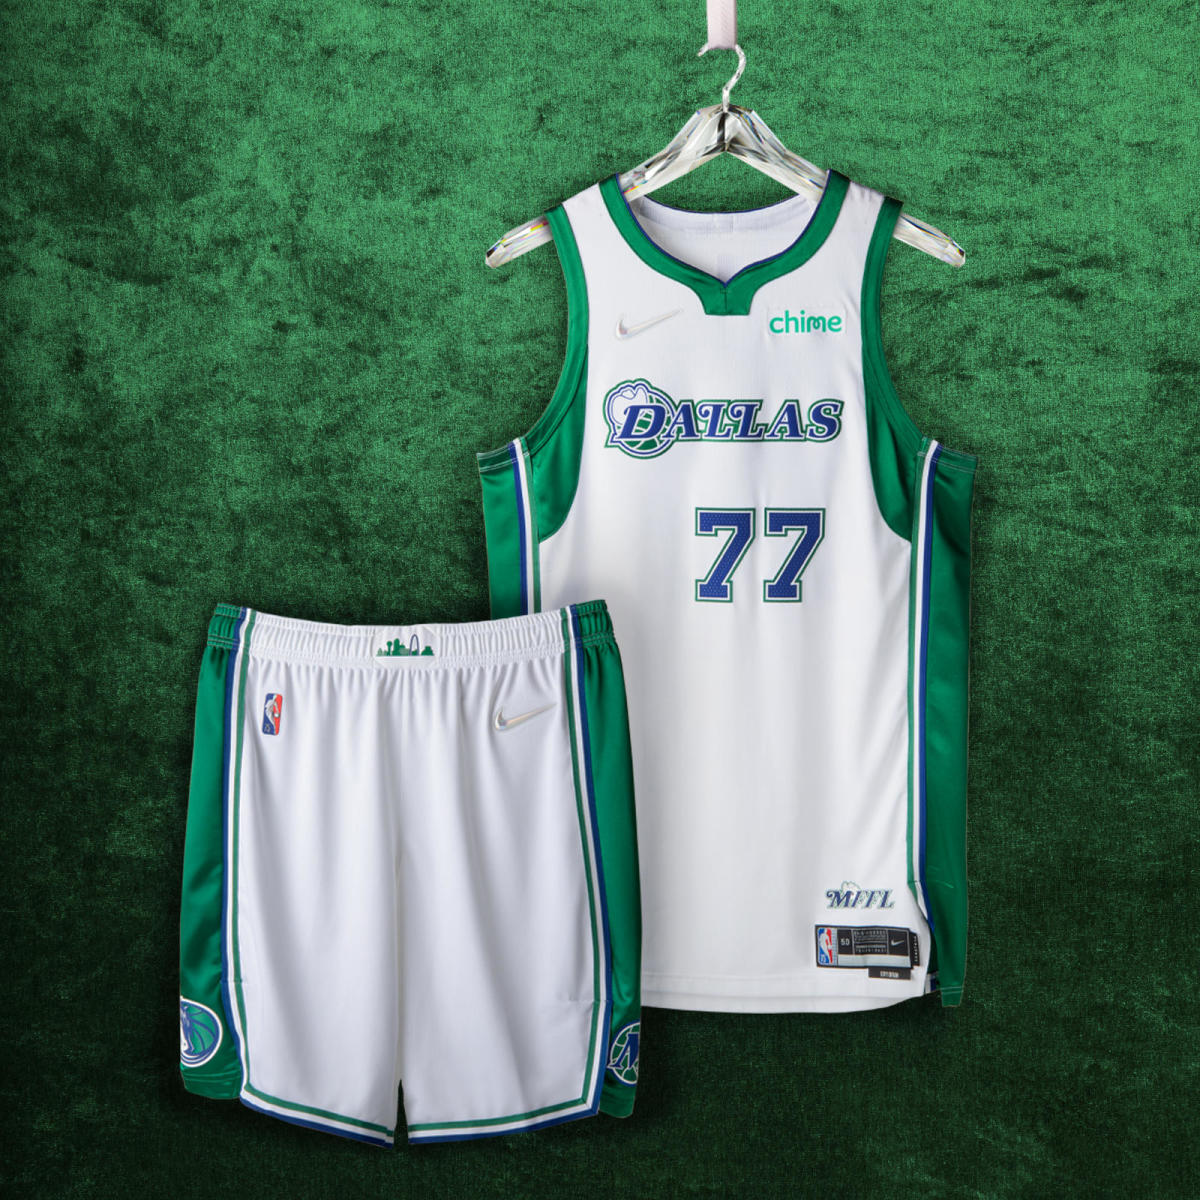 Wizards unveil new City Edition jerseys – South Lakes Sentinel